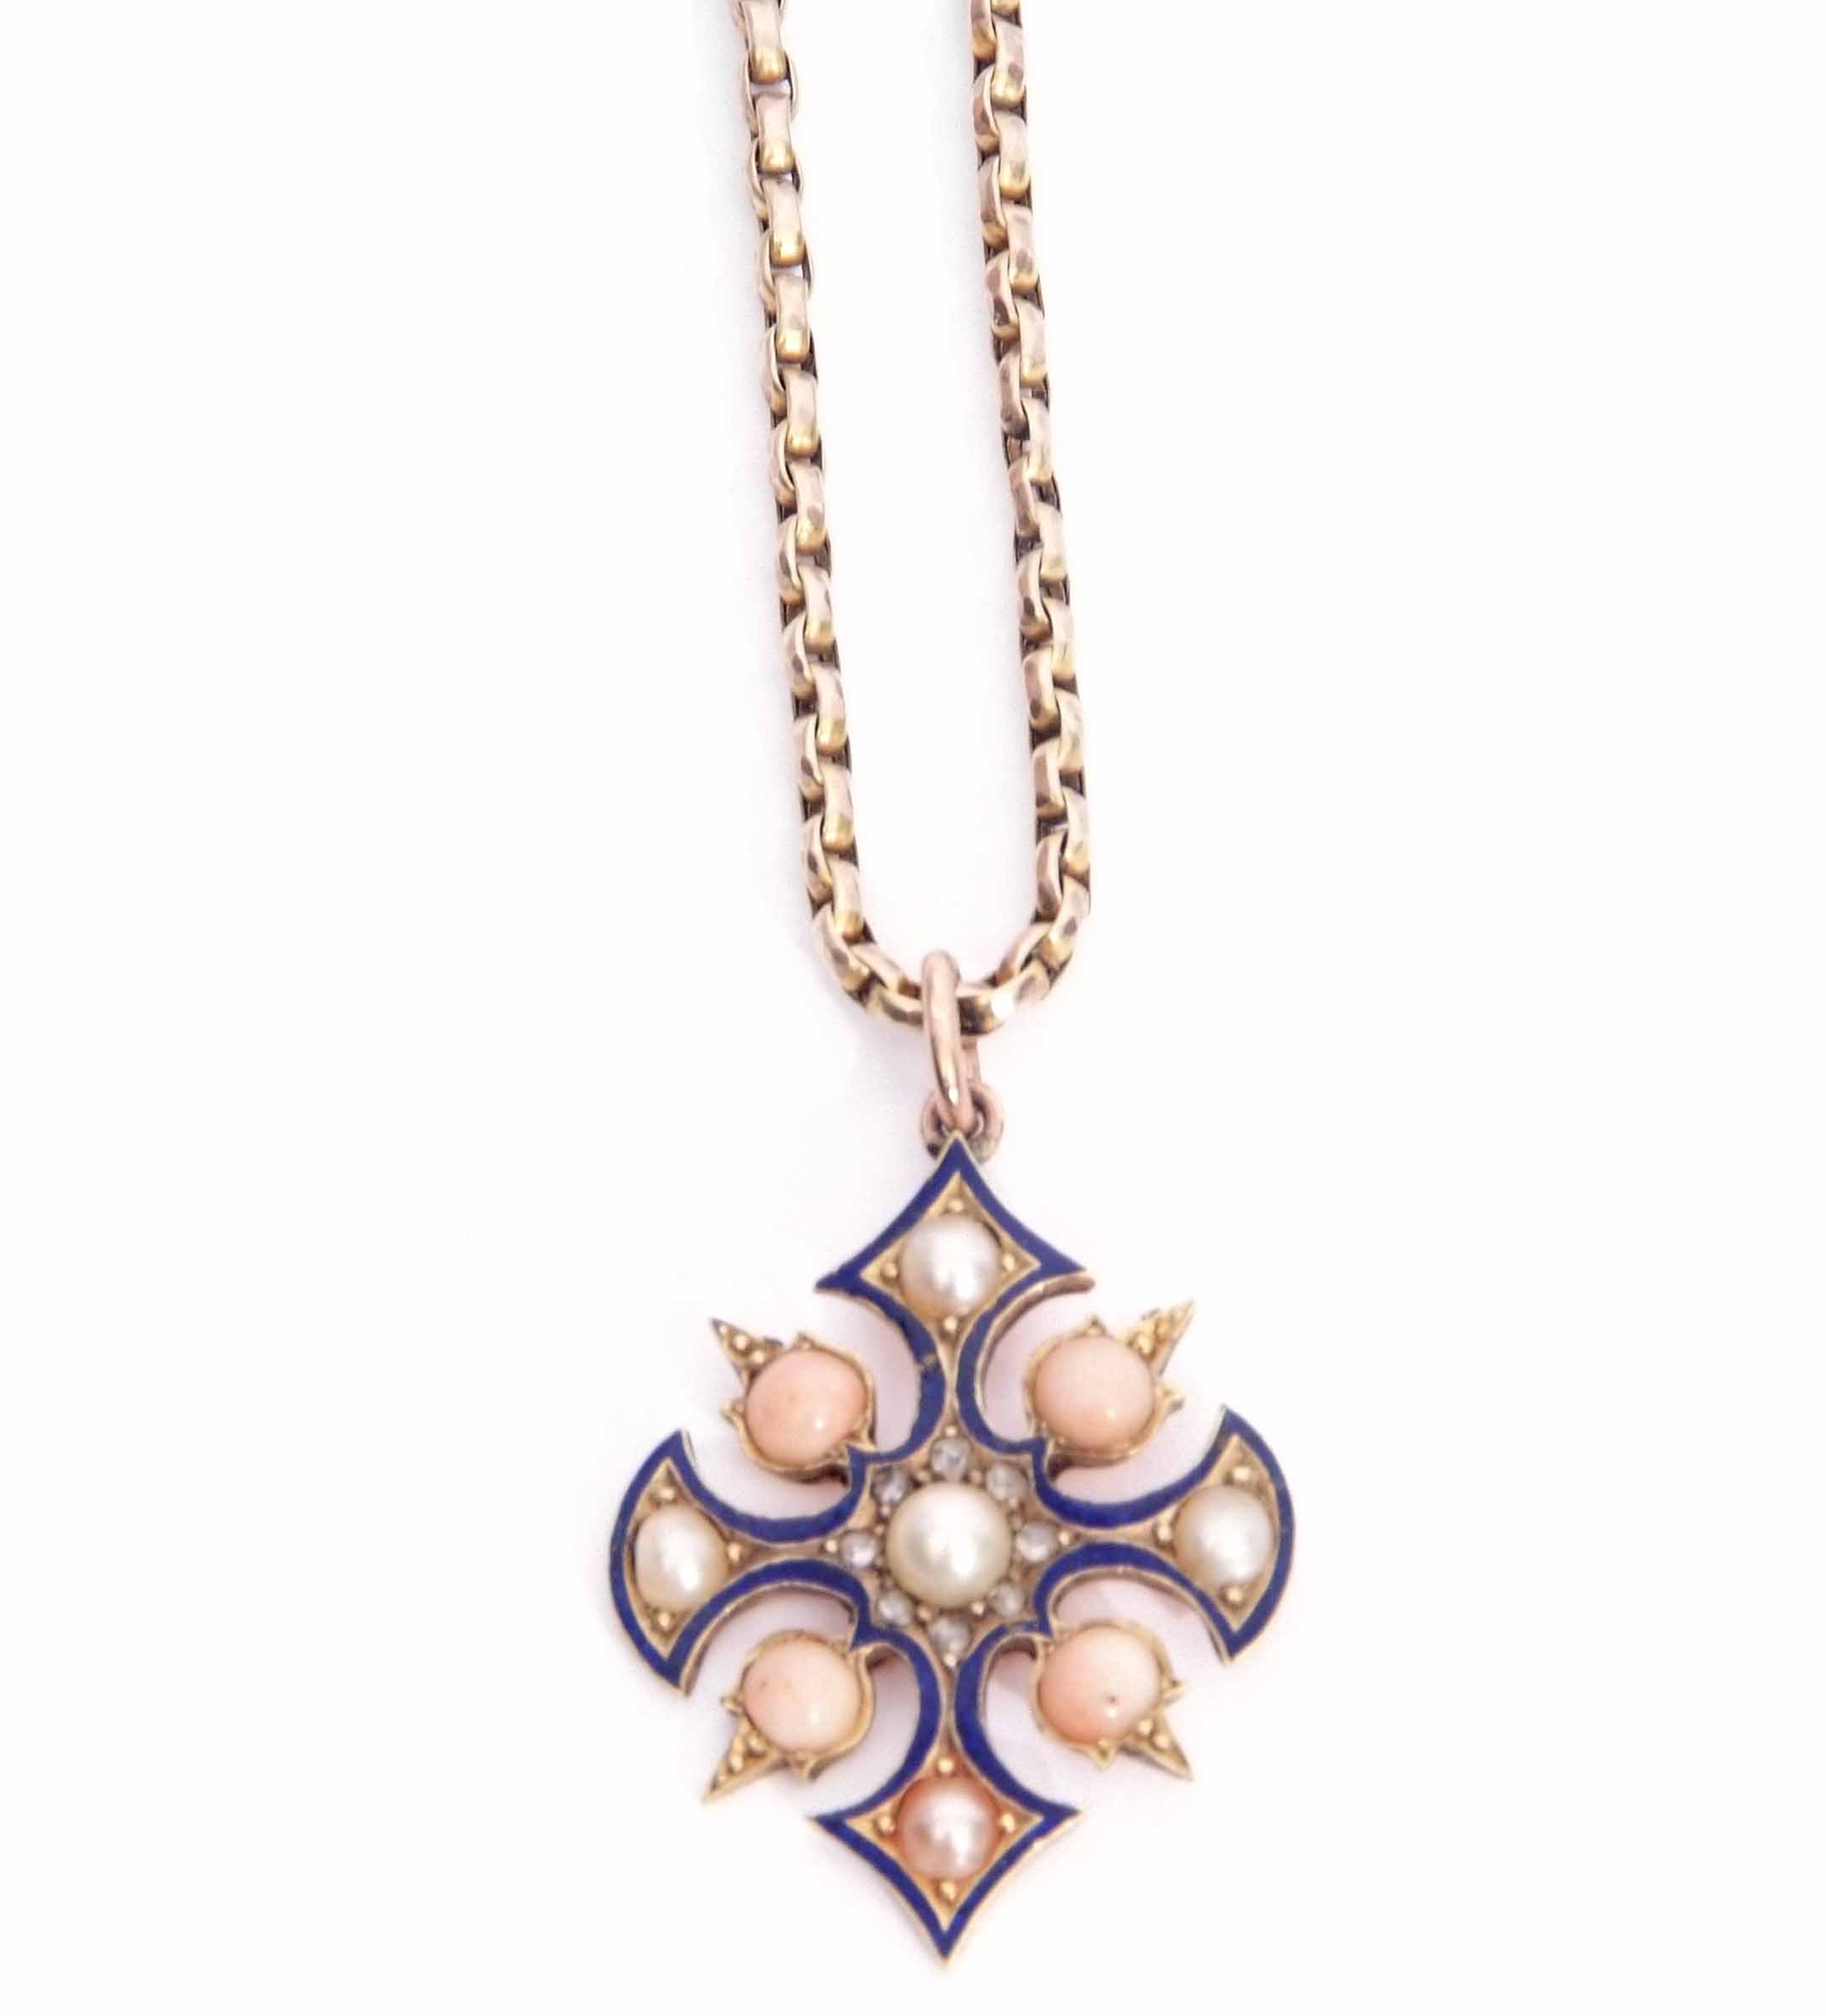 Antique blue enamel, pearl, coral and diamond set cross pendant featuring a central pearl surrounded - Image 5 of 7